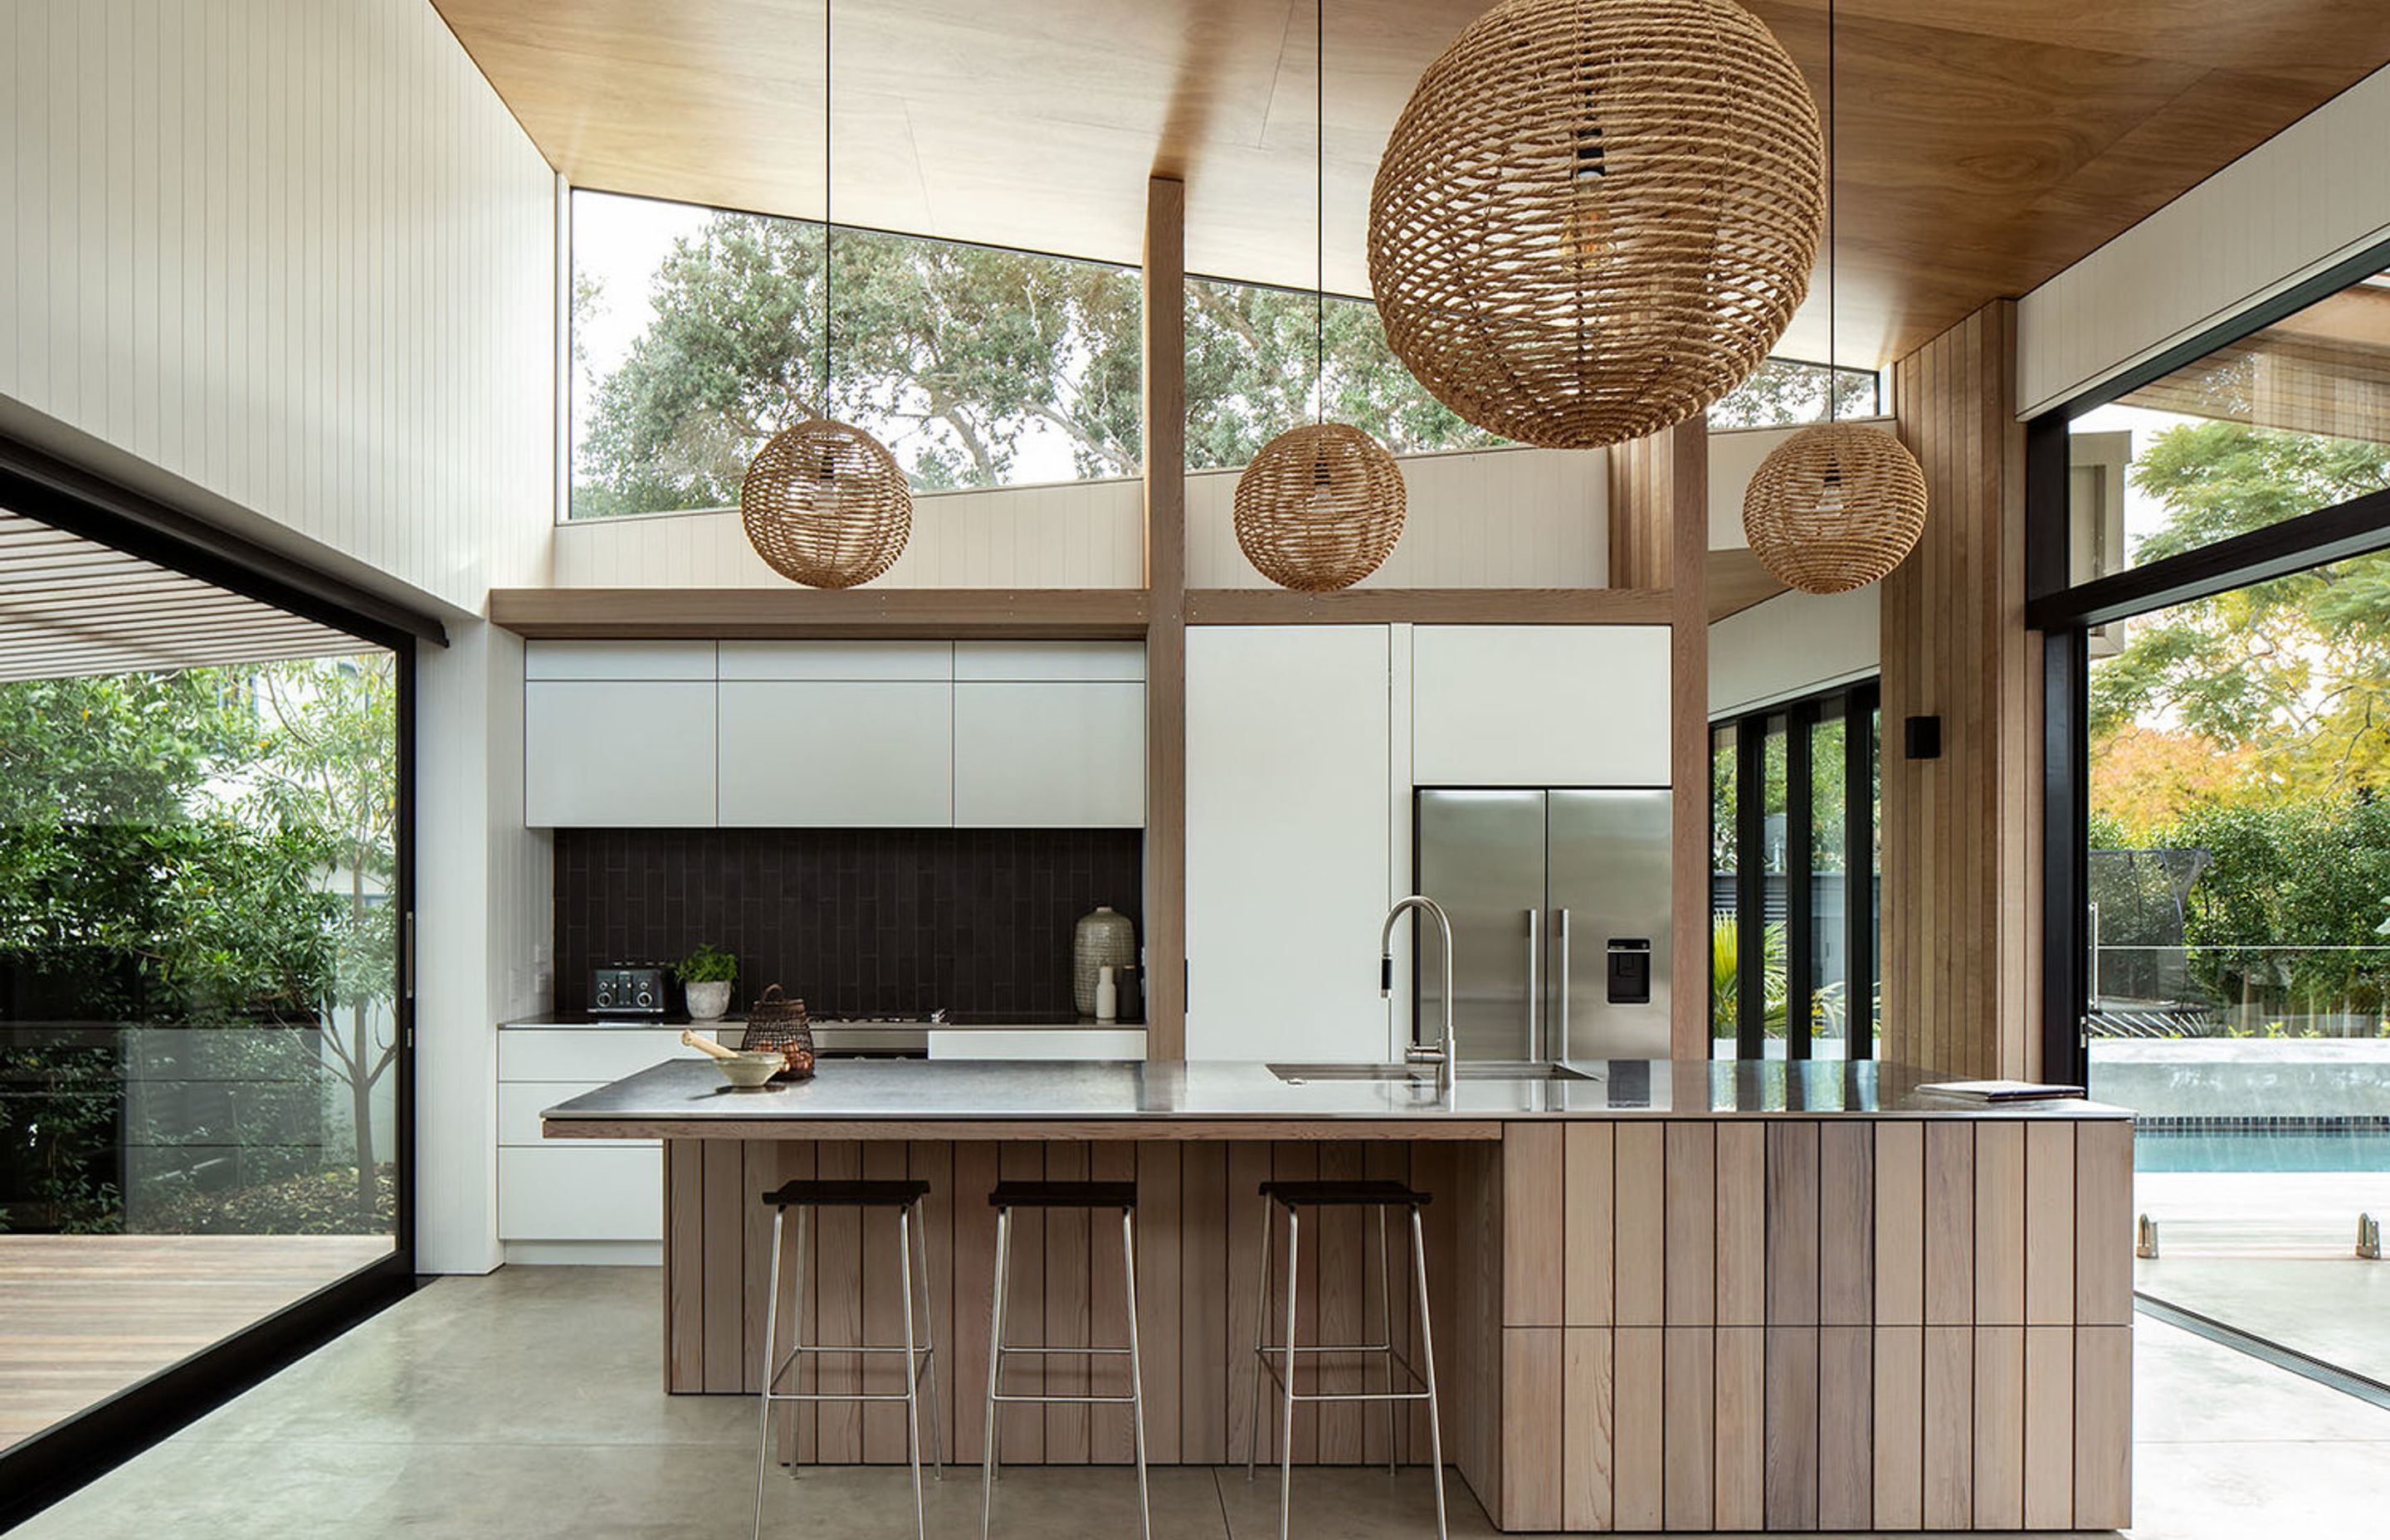 In the kitchen, high-level windows draw light deep into the home and provide a view of the old pōhutakawa tree. Sliding doors open the space up on either side.